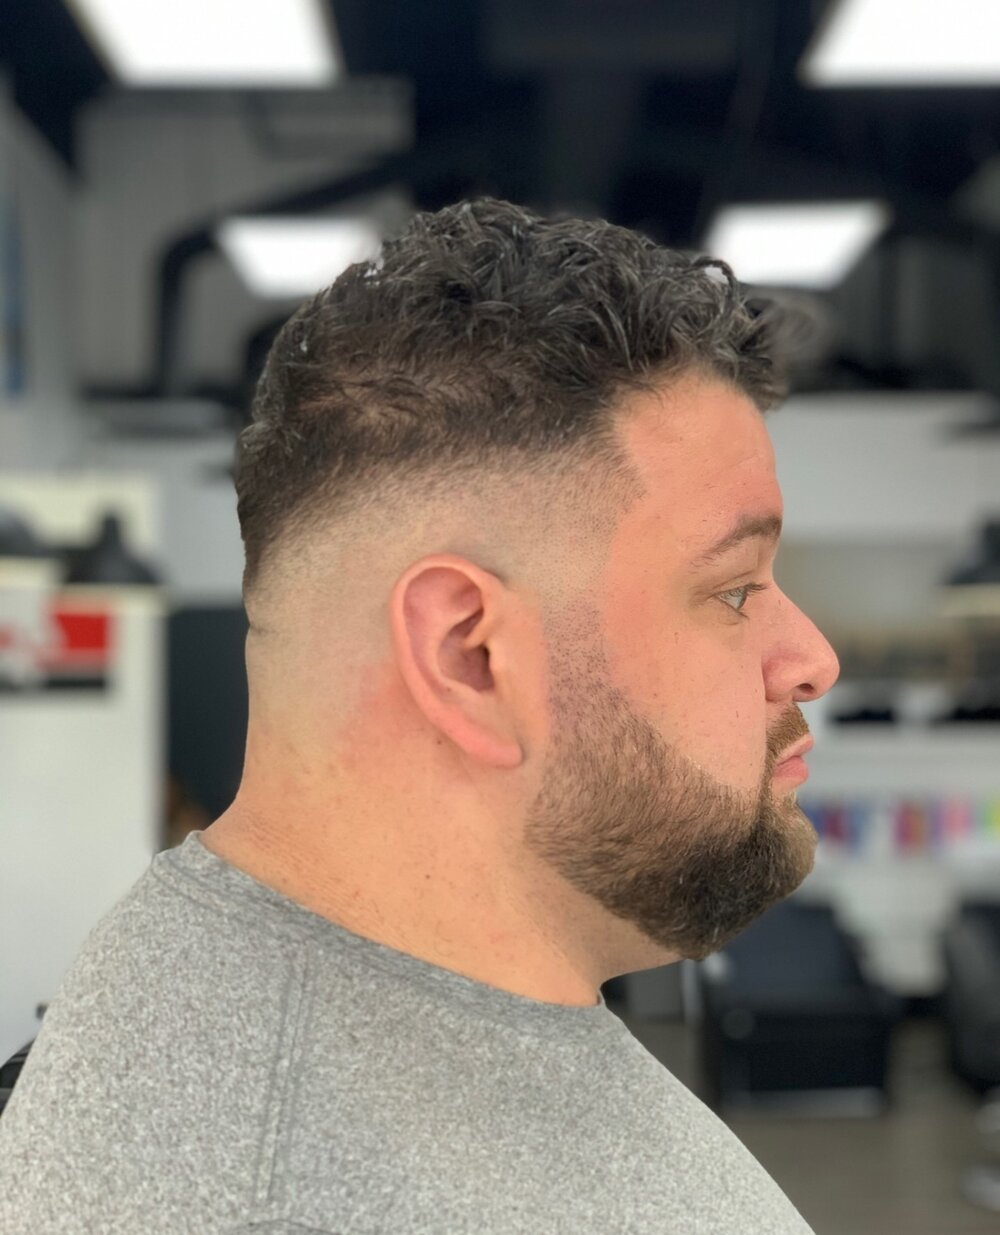 Fresh Fade for the weekend!⁠
⁠
Guys, we've got barber services at our sister shop in Shawnessy @rush.barber.beauty! We're ready to get your looking sharp AND typically offer same day appointments! ⁠
⁠
Click the link in our bio to book!